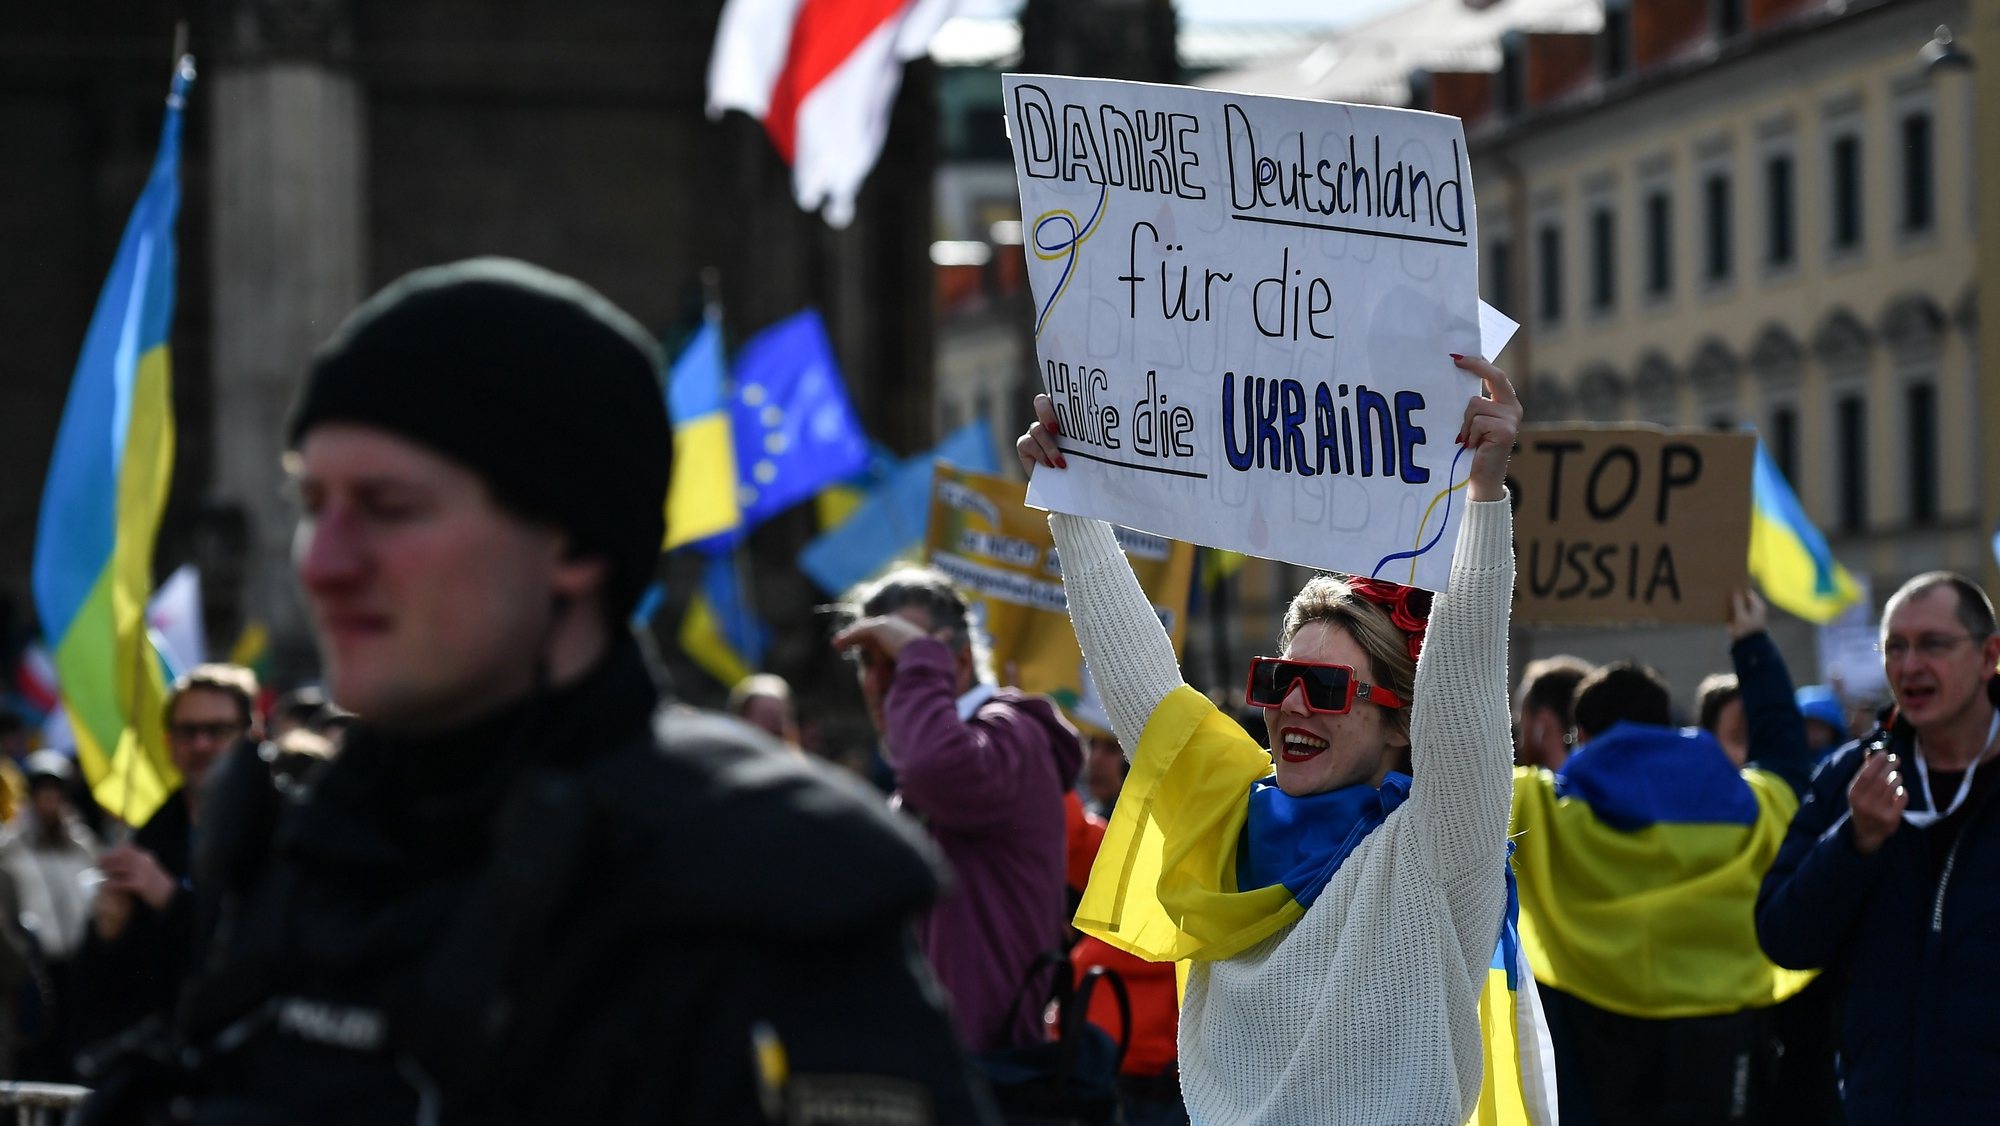 epa10475076 A woman holds a banner reading &#039;Thank you German for help to Ukraine&#039; during a rally supporting Ukraine during the 59th Munich Security Conference (MSC) in Munich, Germany, 18 February 2023. More than 500 high-level international decision-makers meet at the 59th Munich Security Conference in Munich during their annual meeting from 17 to 19 February 2023 to discuss global security issues.  EPA/ANNA SZILAGYI